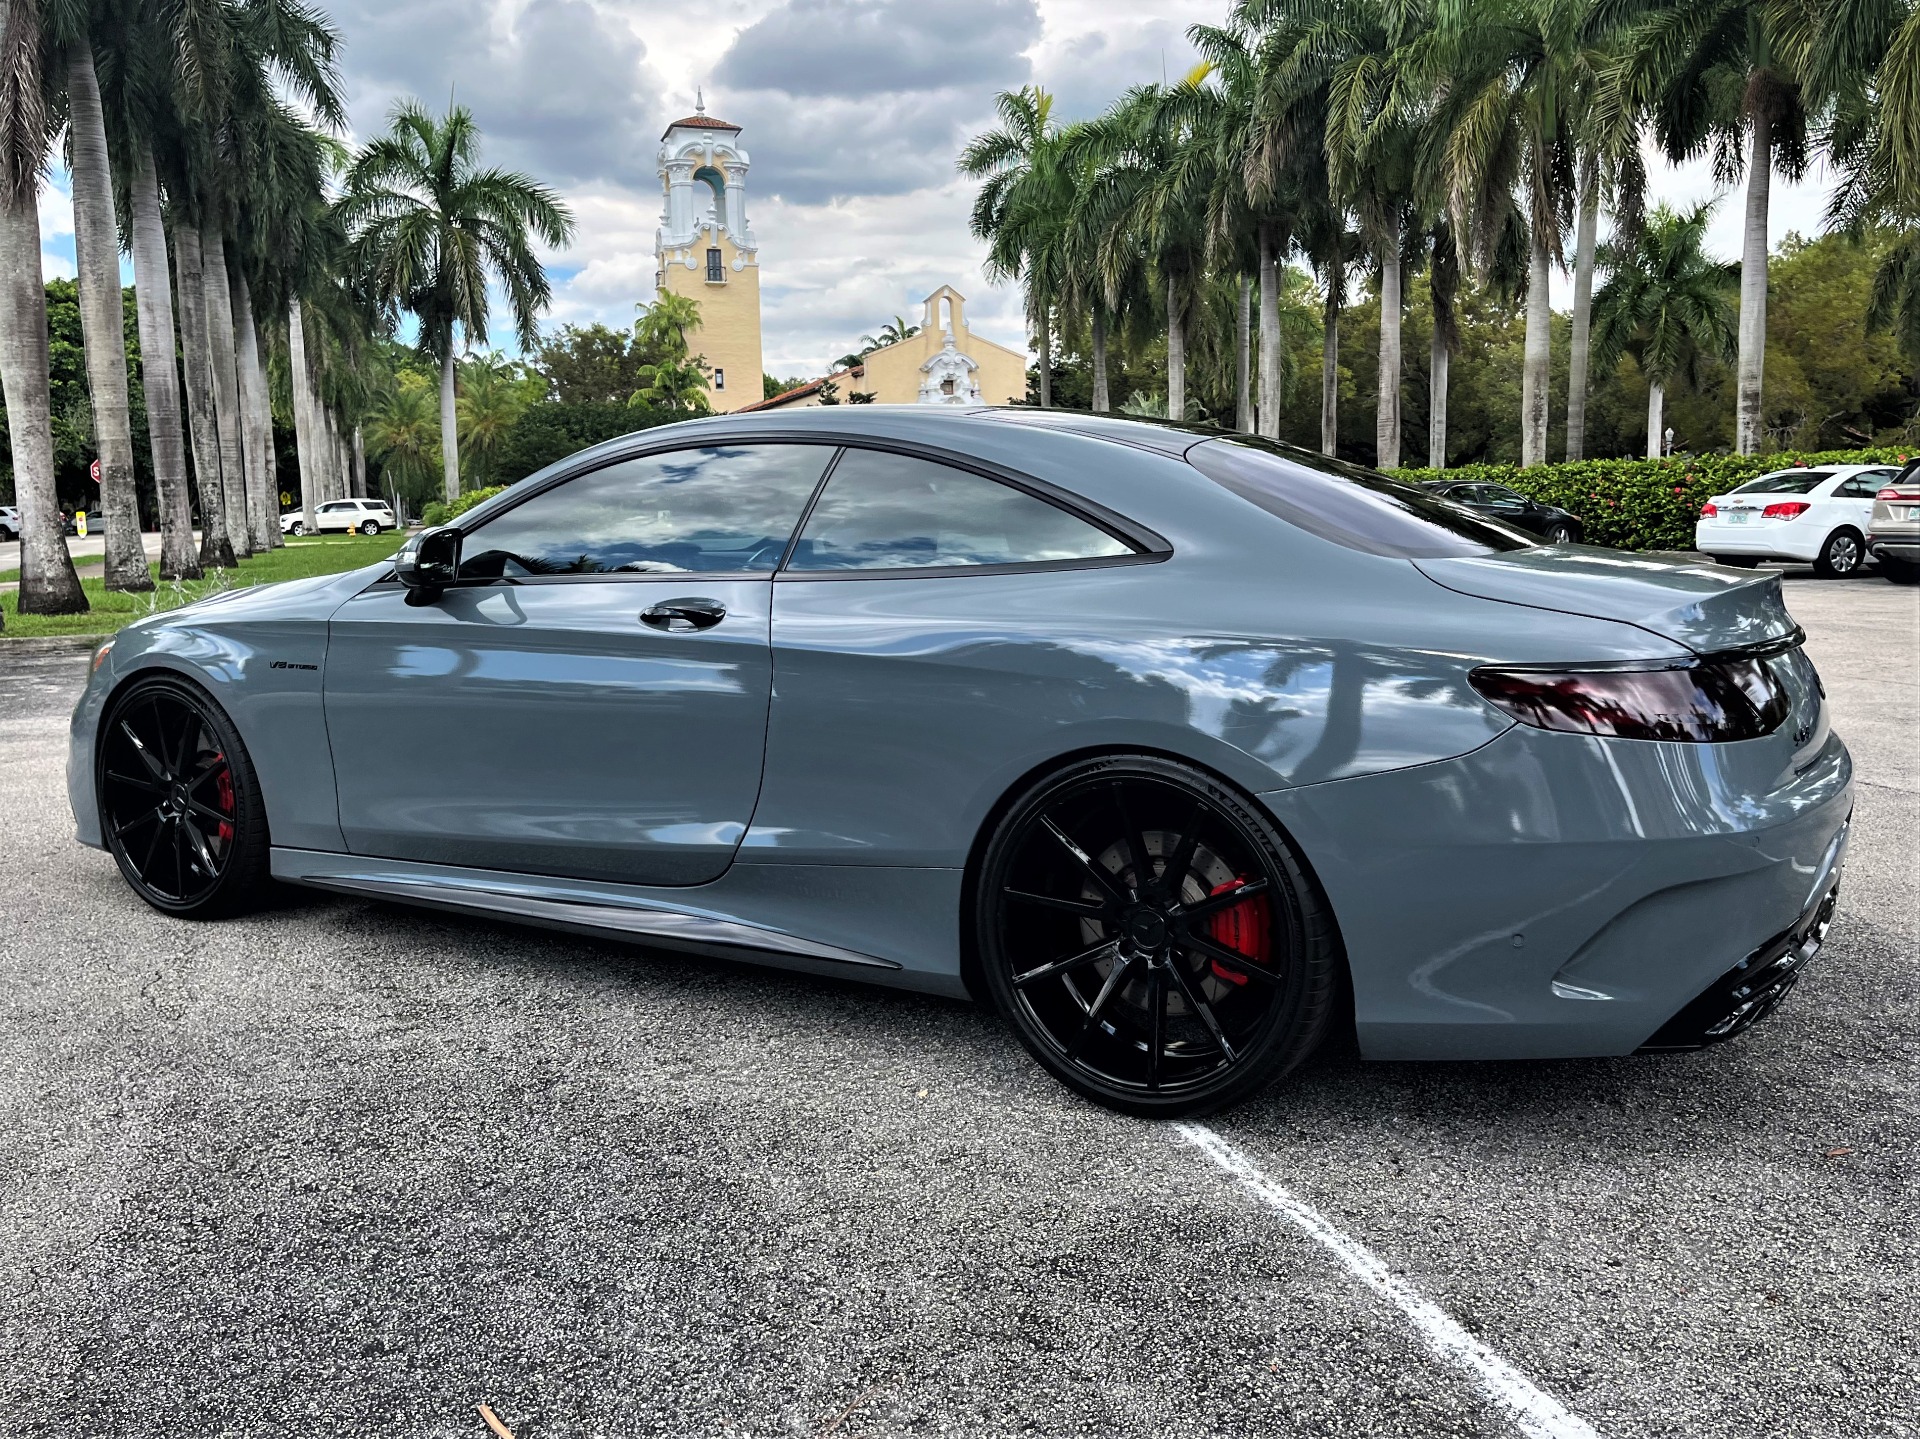 Used 2015 Mercedes-Benz S-Class S 63 AMG for sale Sold at The Gables Sports Cars in Miami FL 33146 4